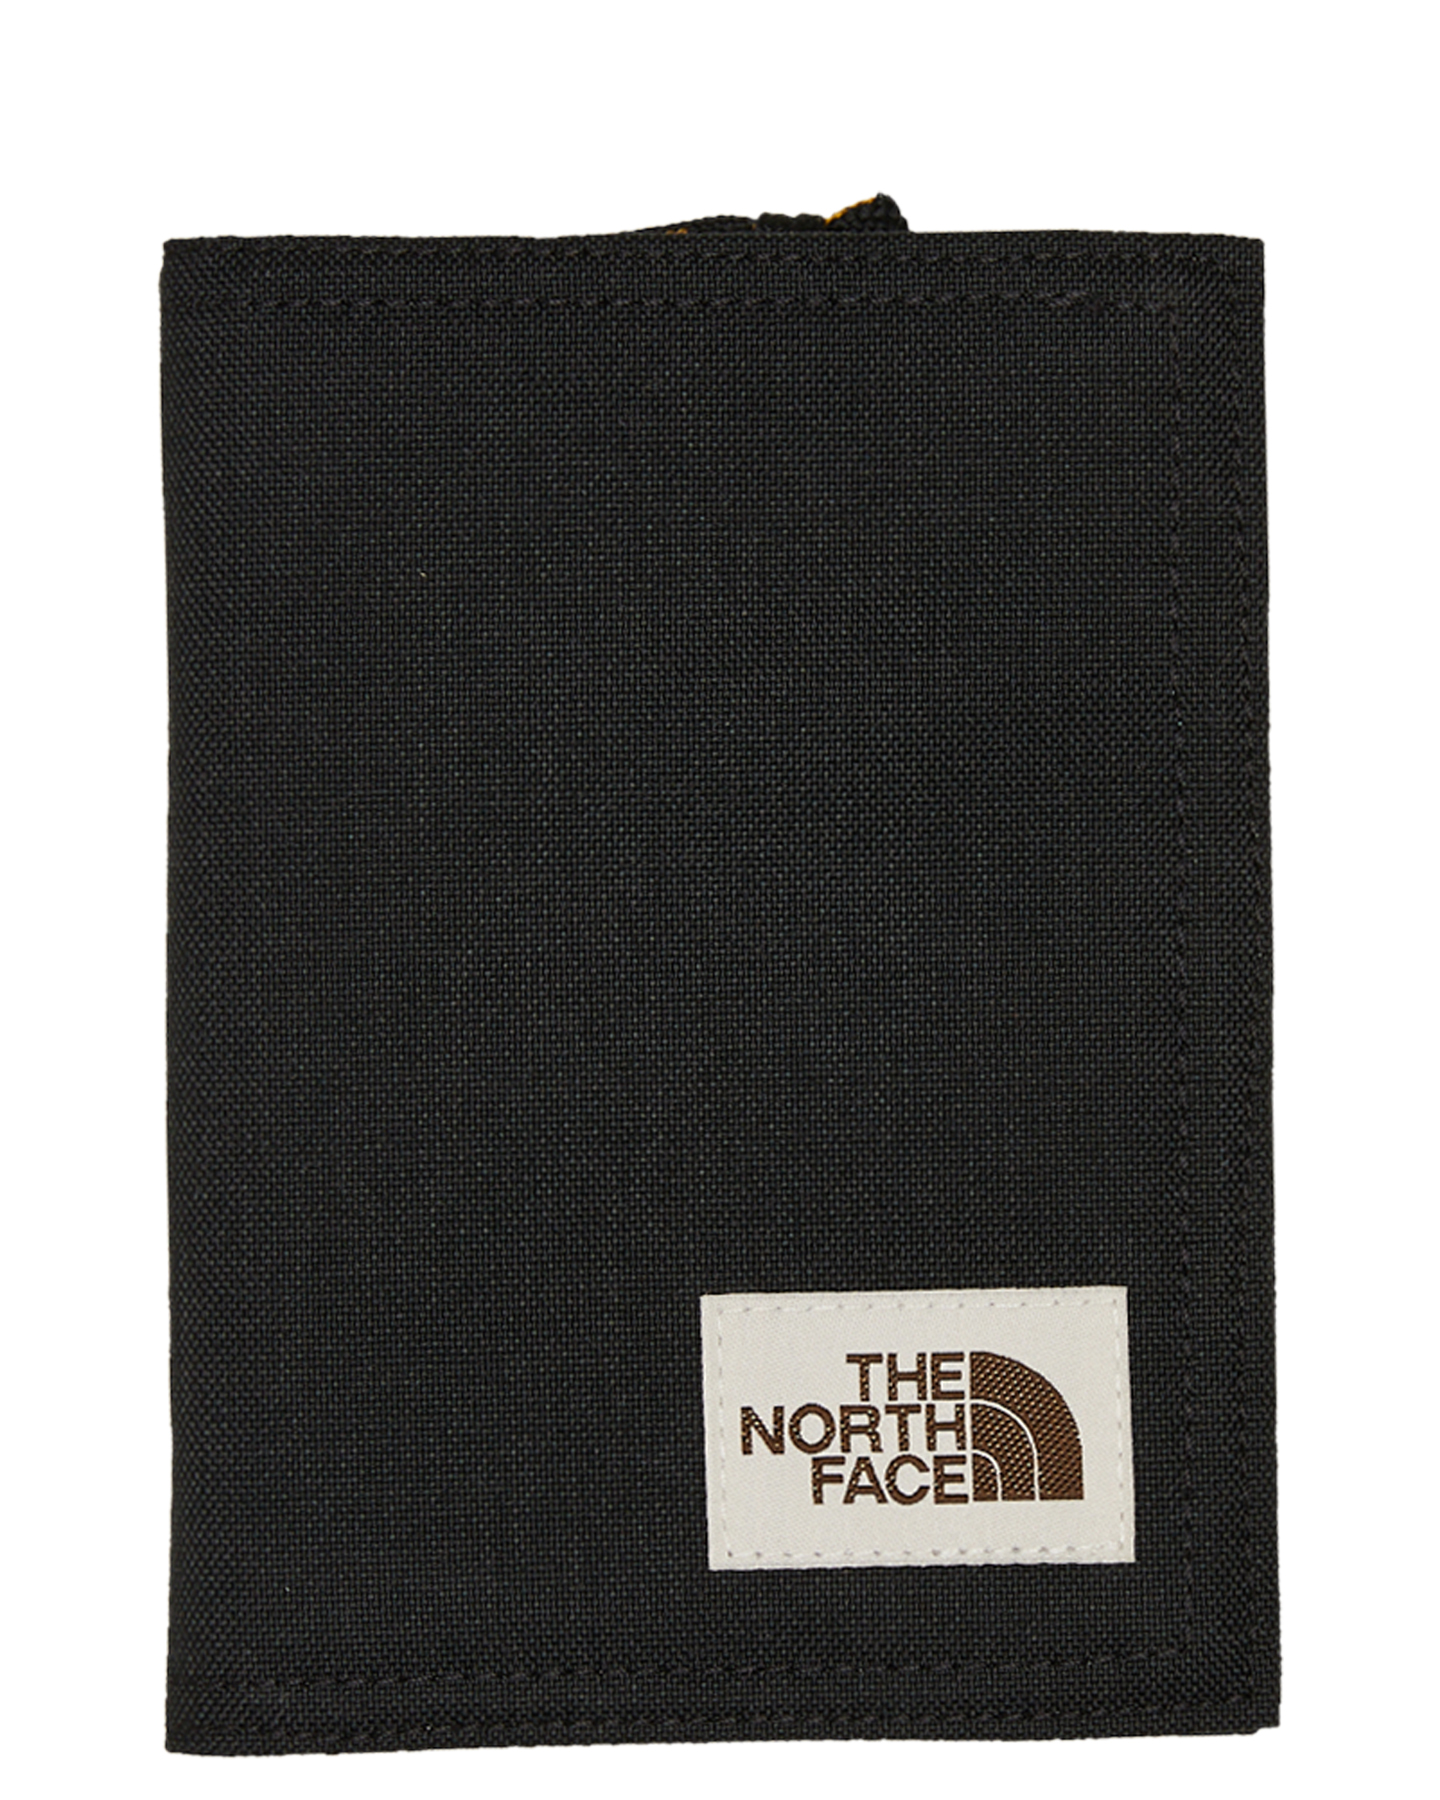 the north face sydney